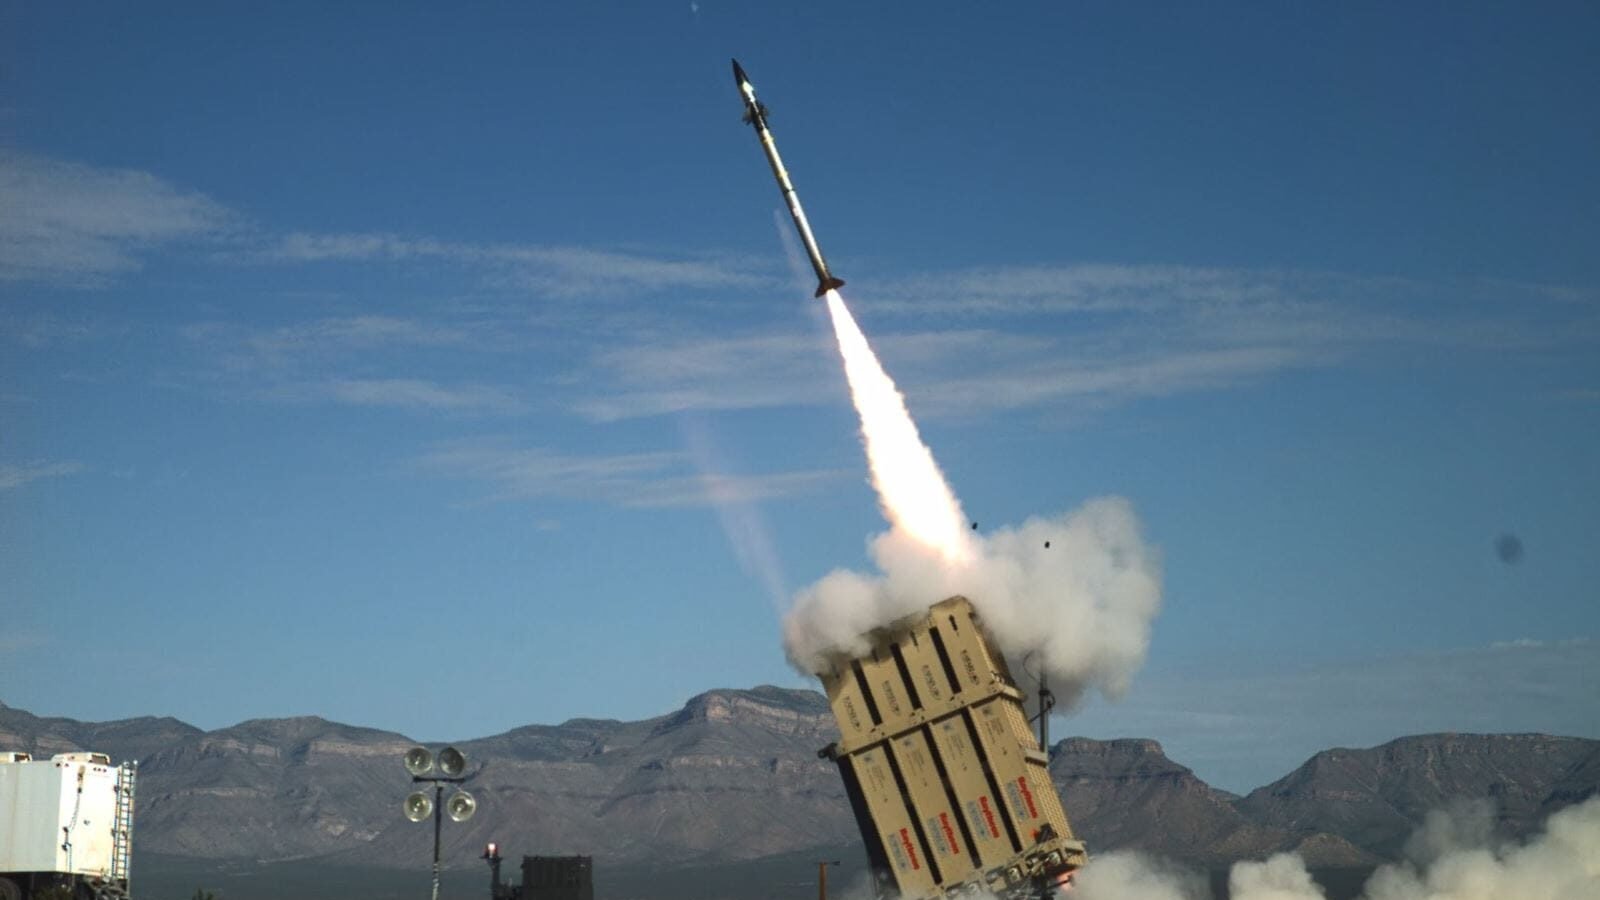 Marines eye 2025 fielding of 3 new, mobile air defense systems